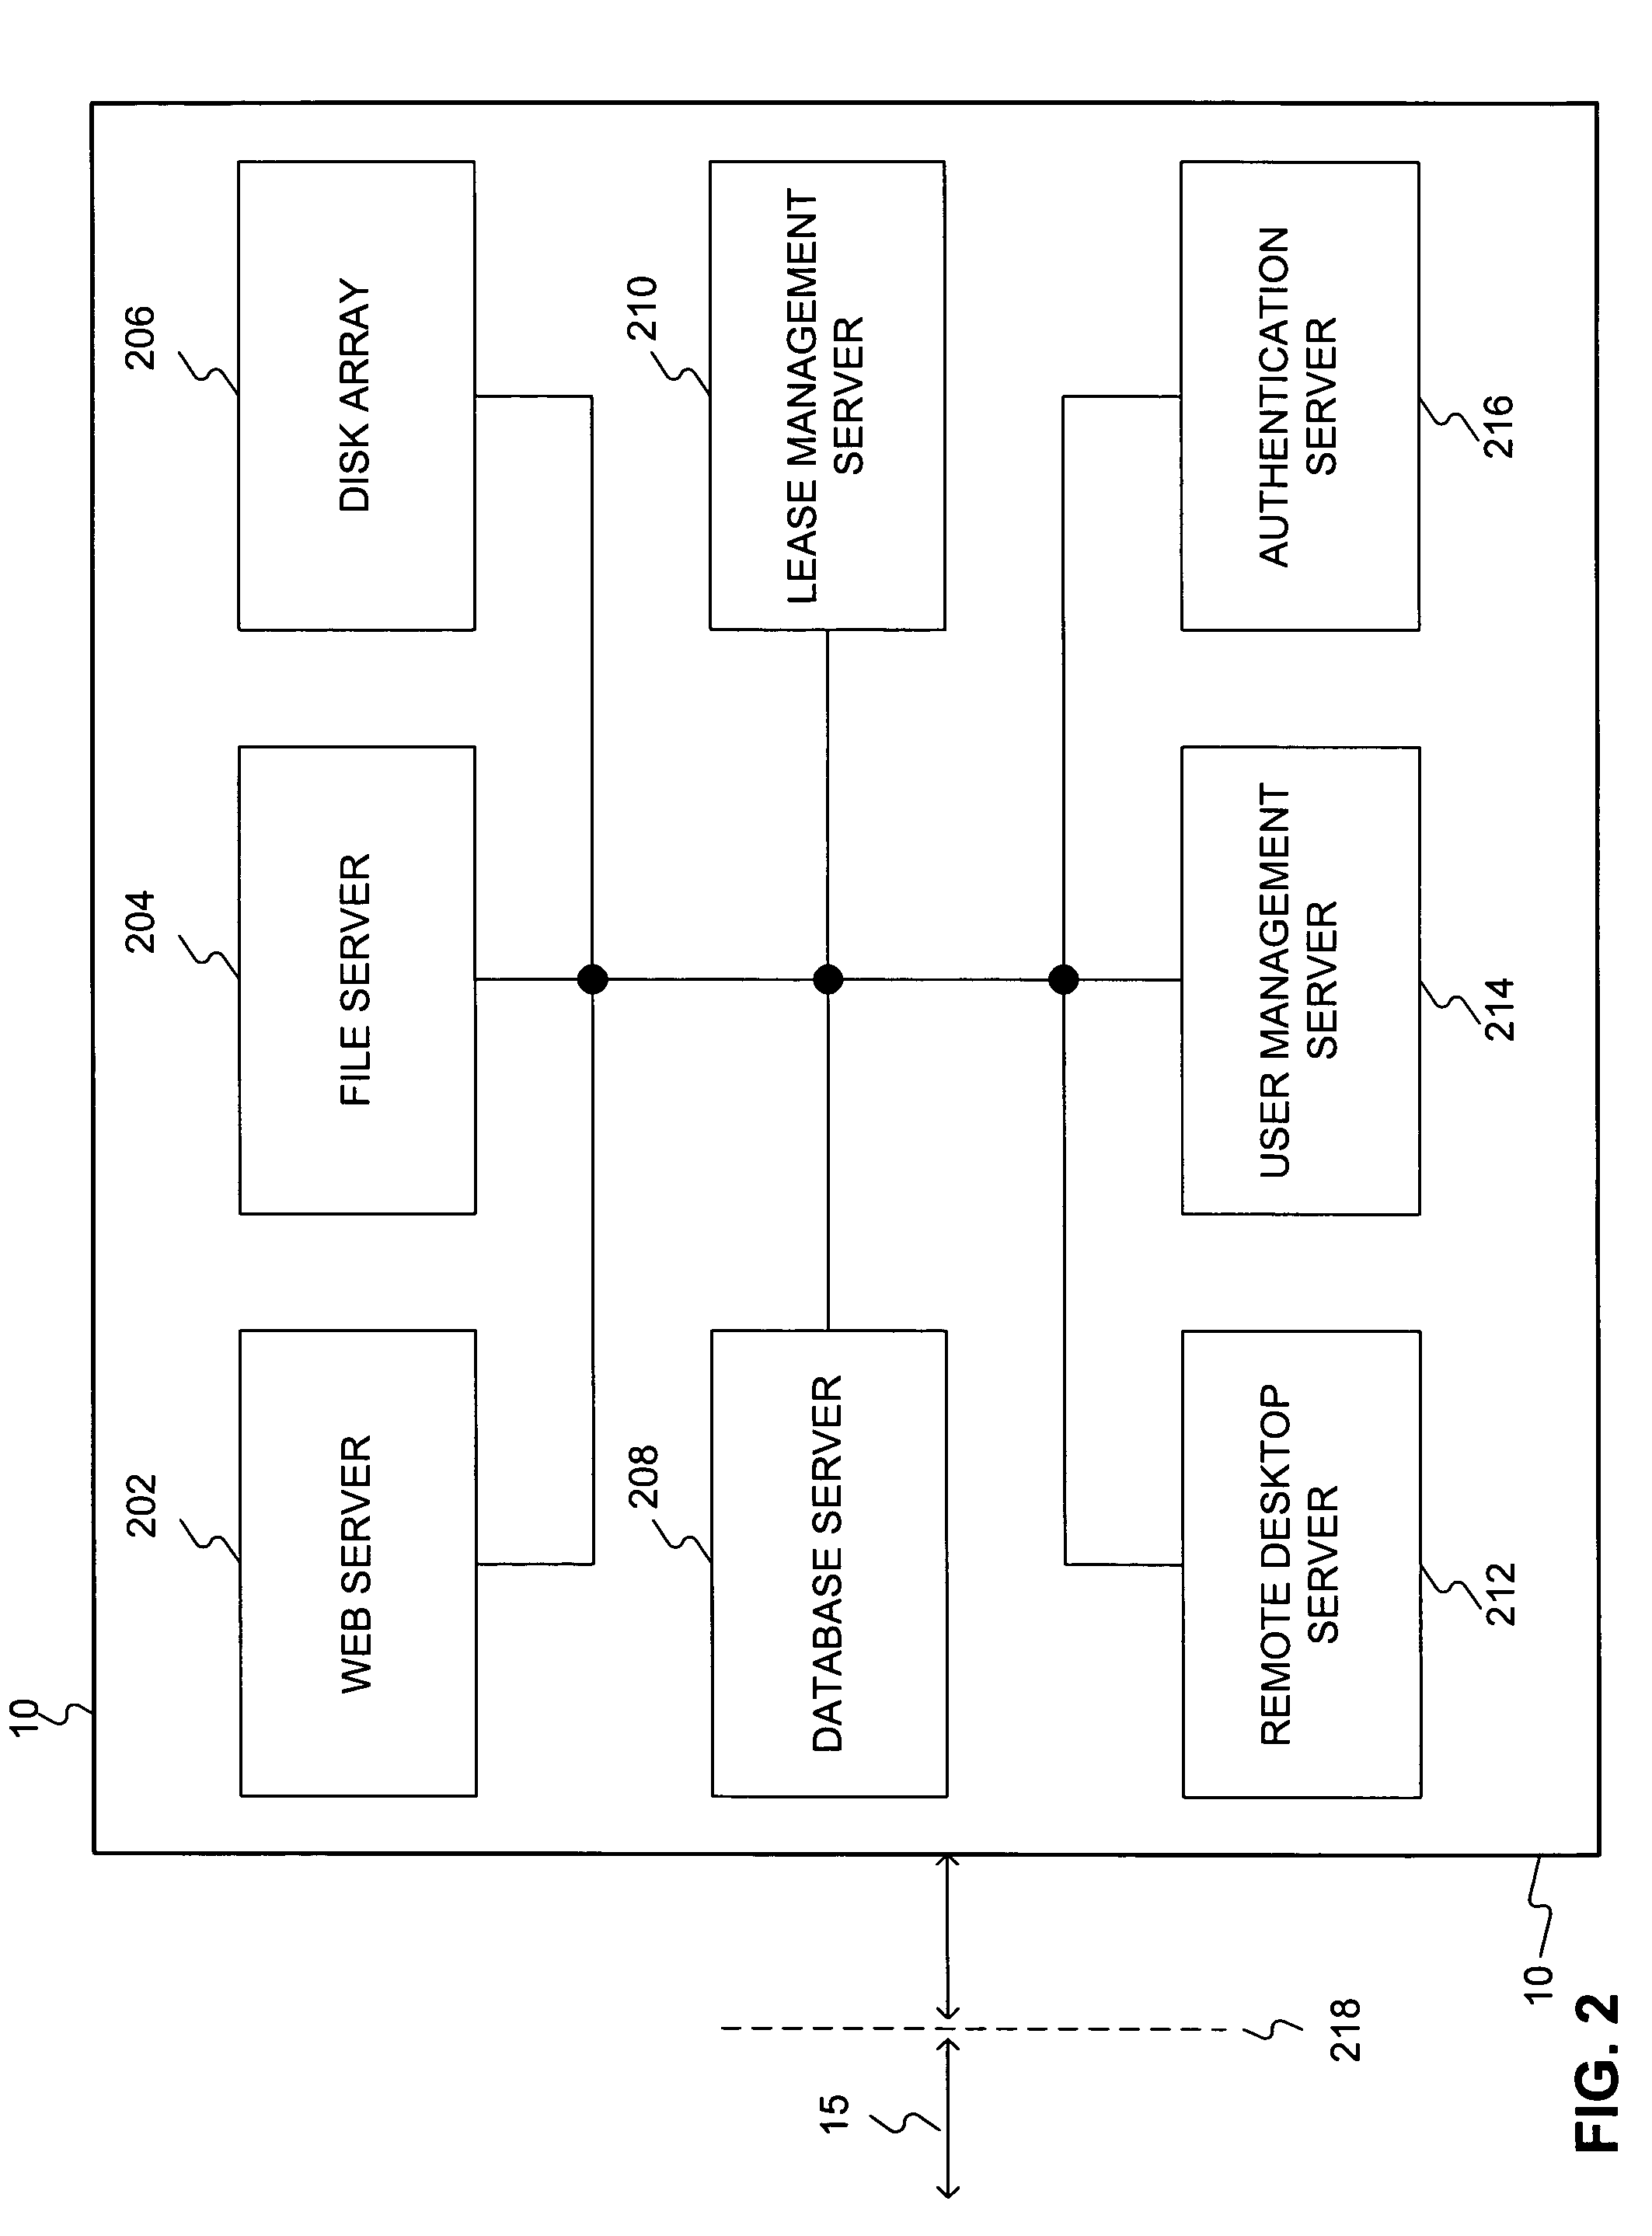 Methods and systems for testing evaluation modules